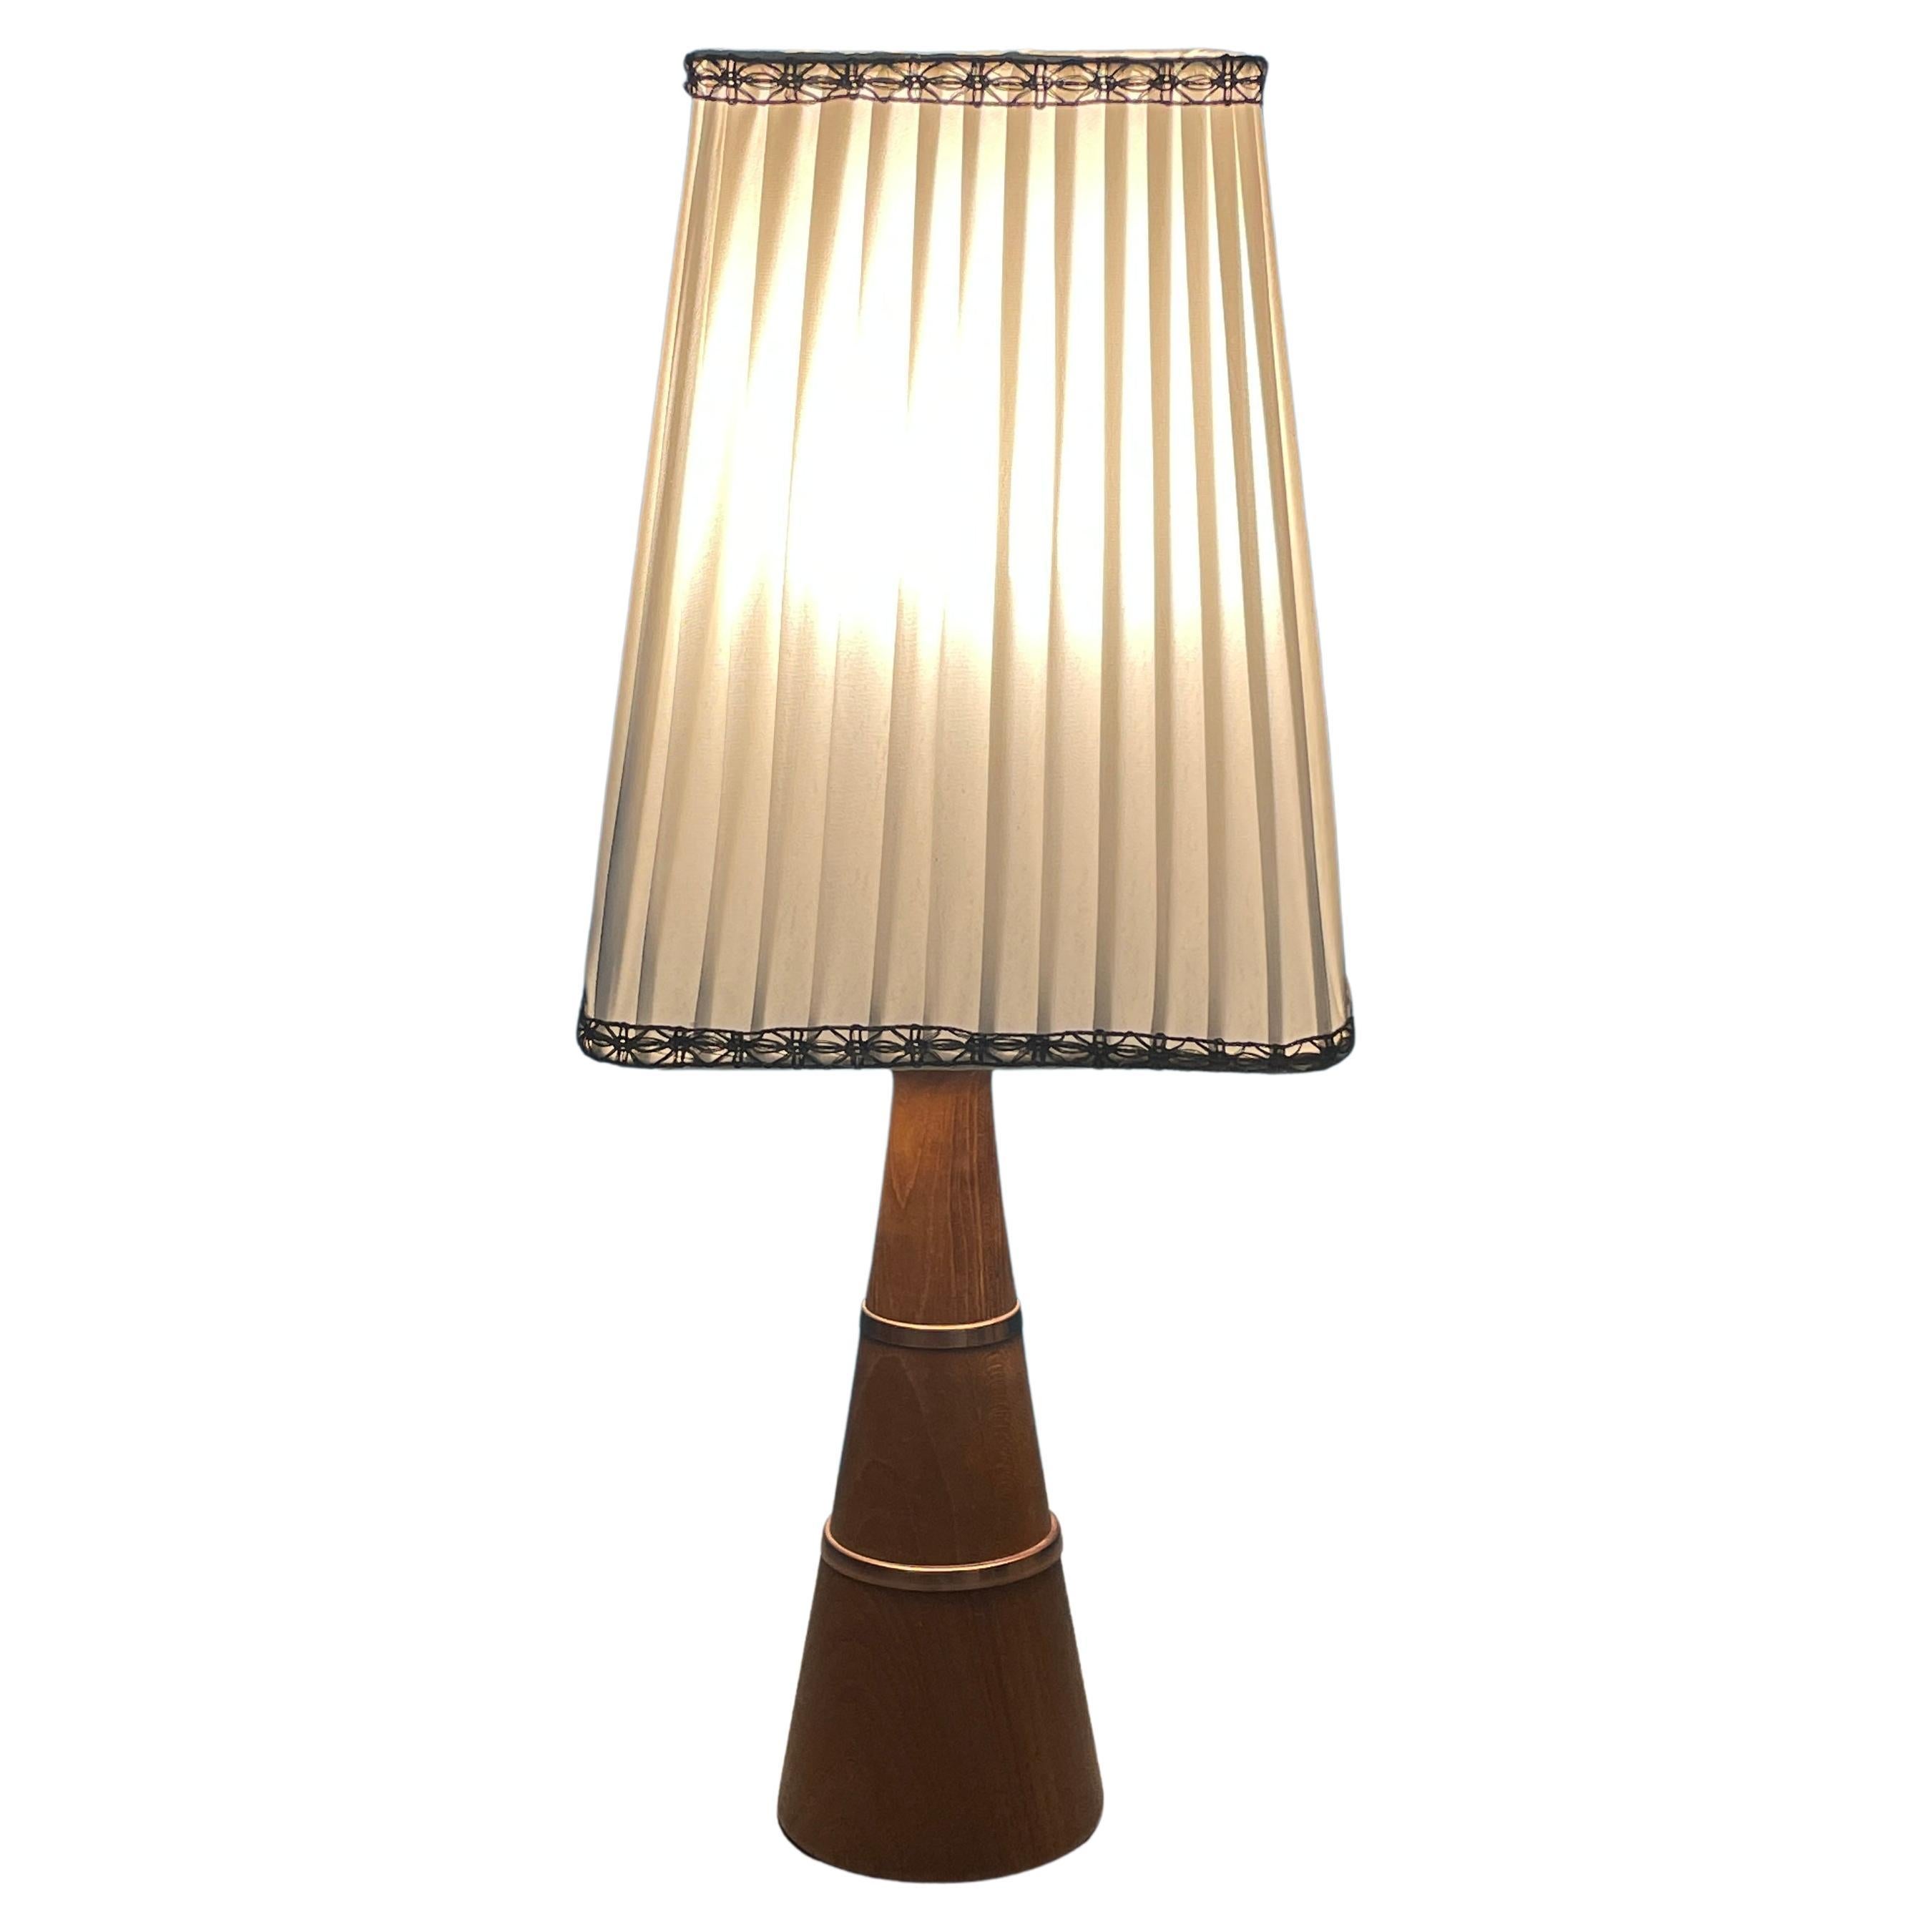 1950's Teak Table lamp, Made in Finland For Sale